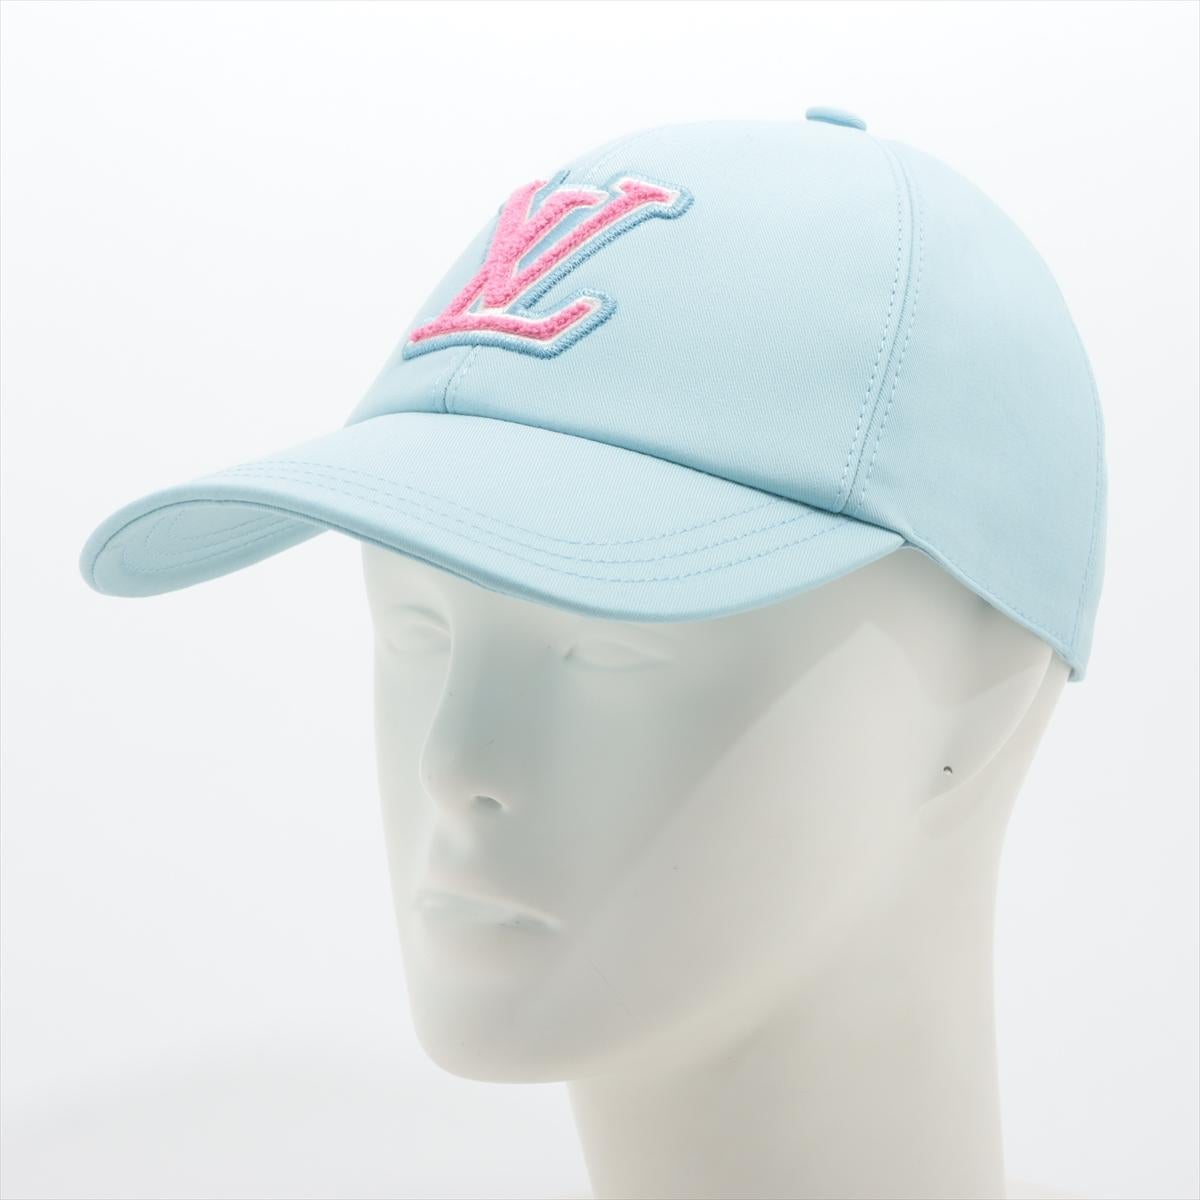 The Louis Vuitton LV Signature Cap in Sky Blue is a stylish and contemporary accessory that effortlessly combines luxury with casual flair. The LV Signature cap brings a fresh burst of sporty style to a classic signature. Crafted in pure cotton, it